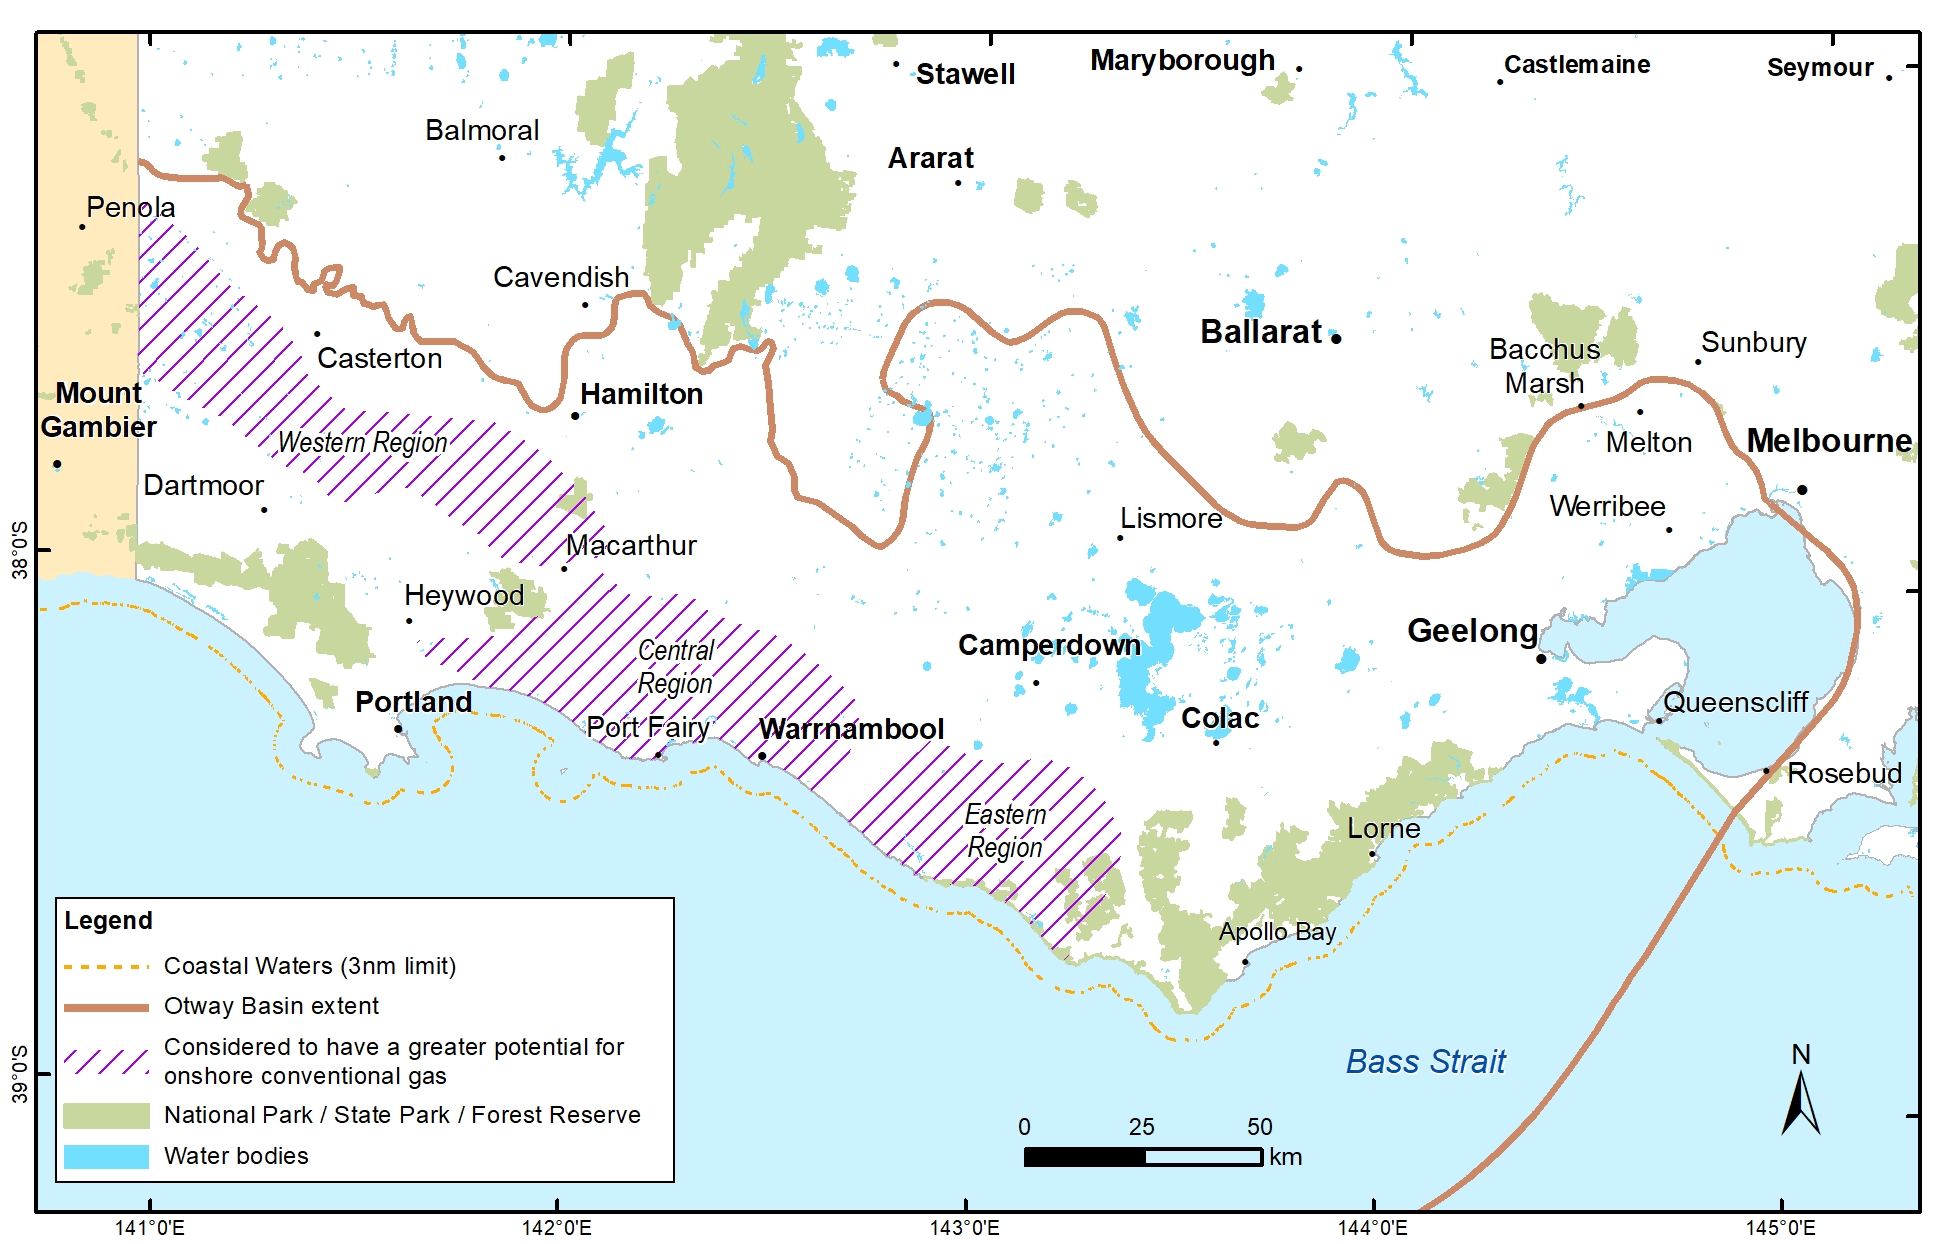 This map shows areas with some level of potential for hosting onshore conventional gas in the Otway Basin